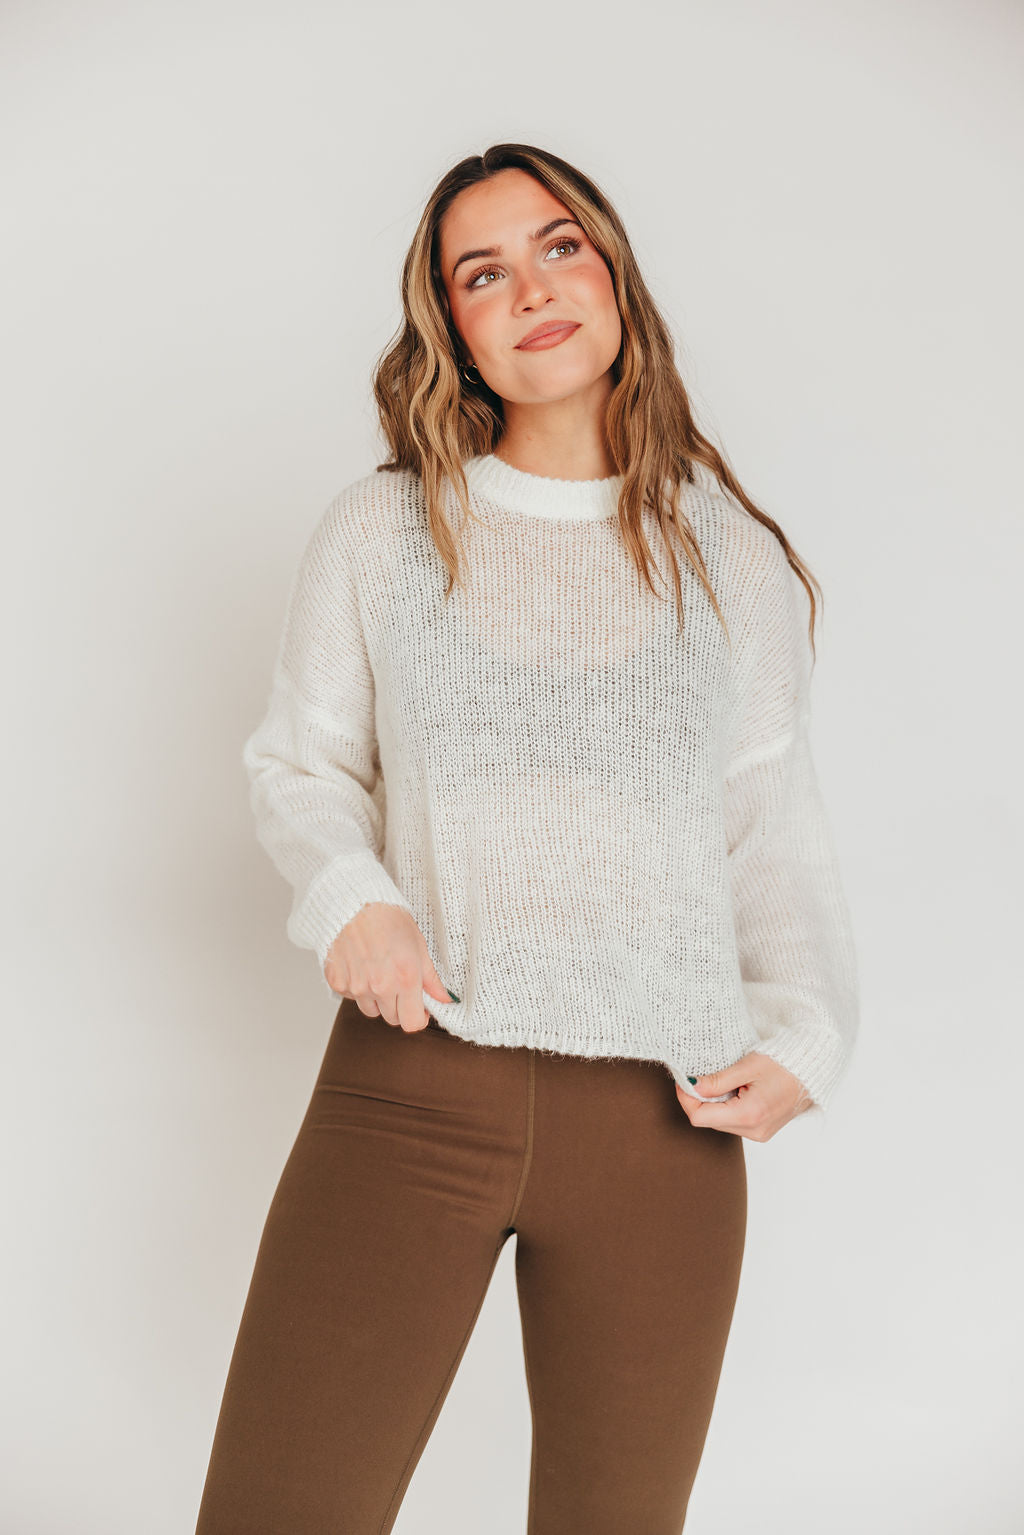 Ariana Sweater in Ivory